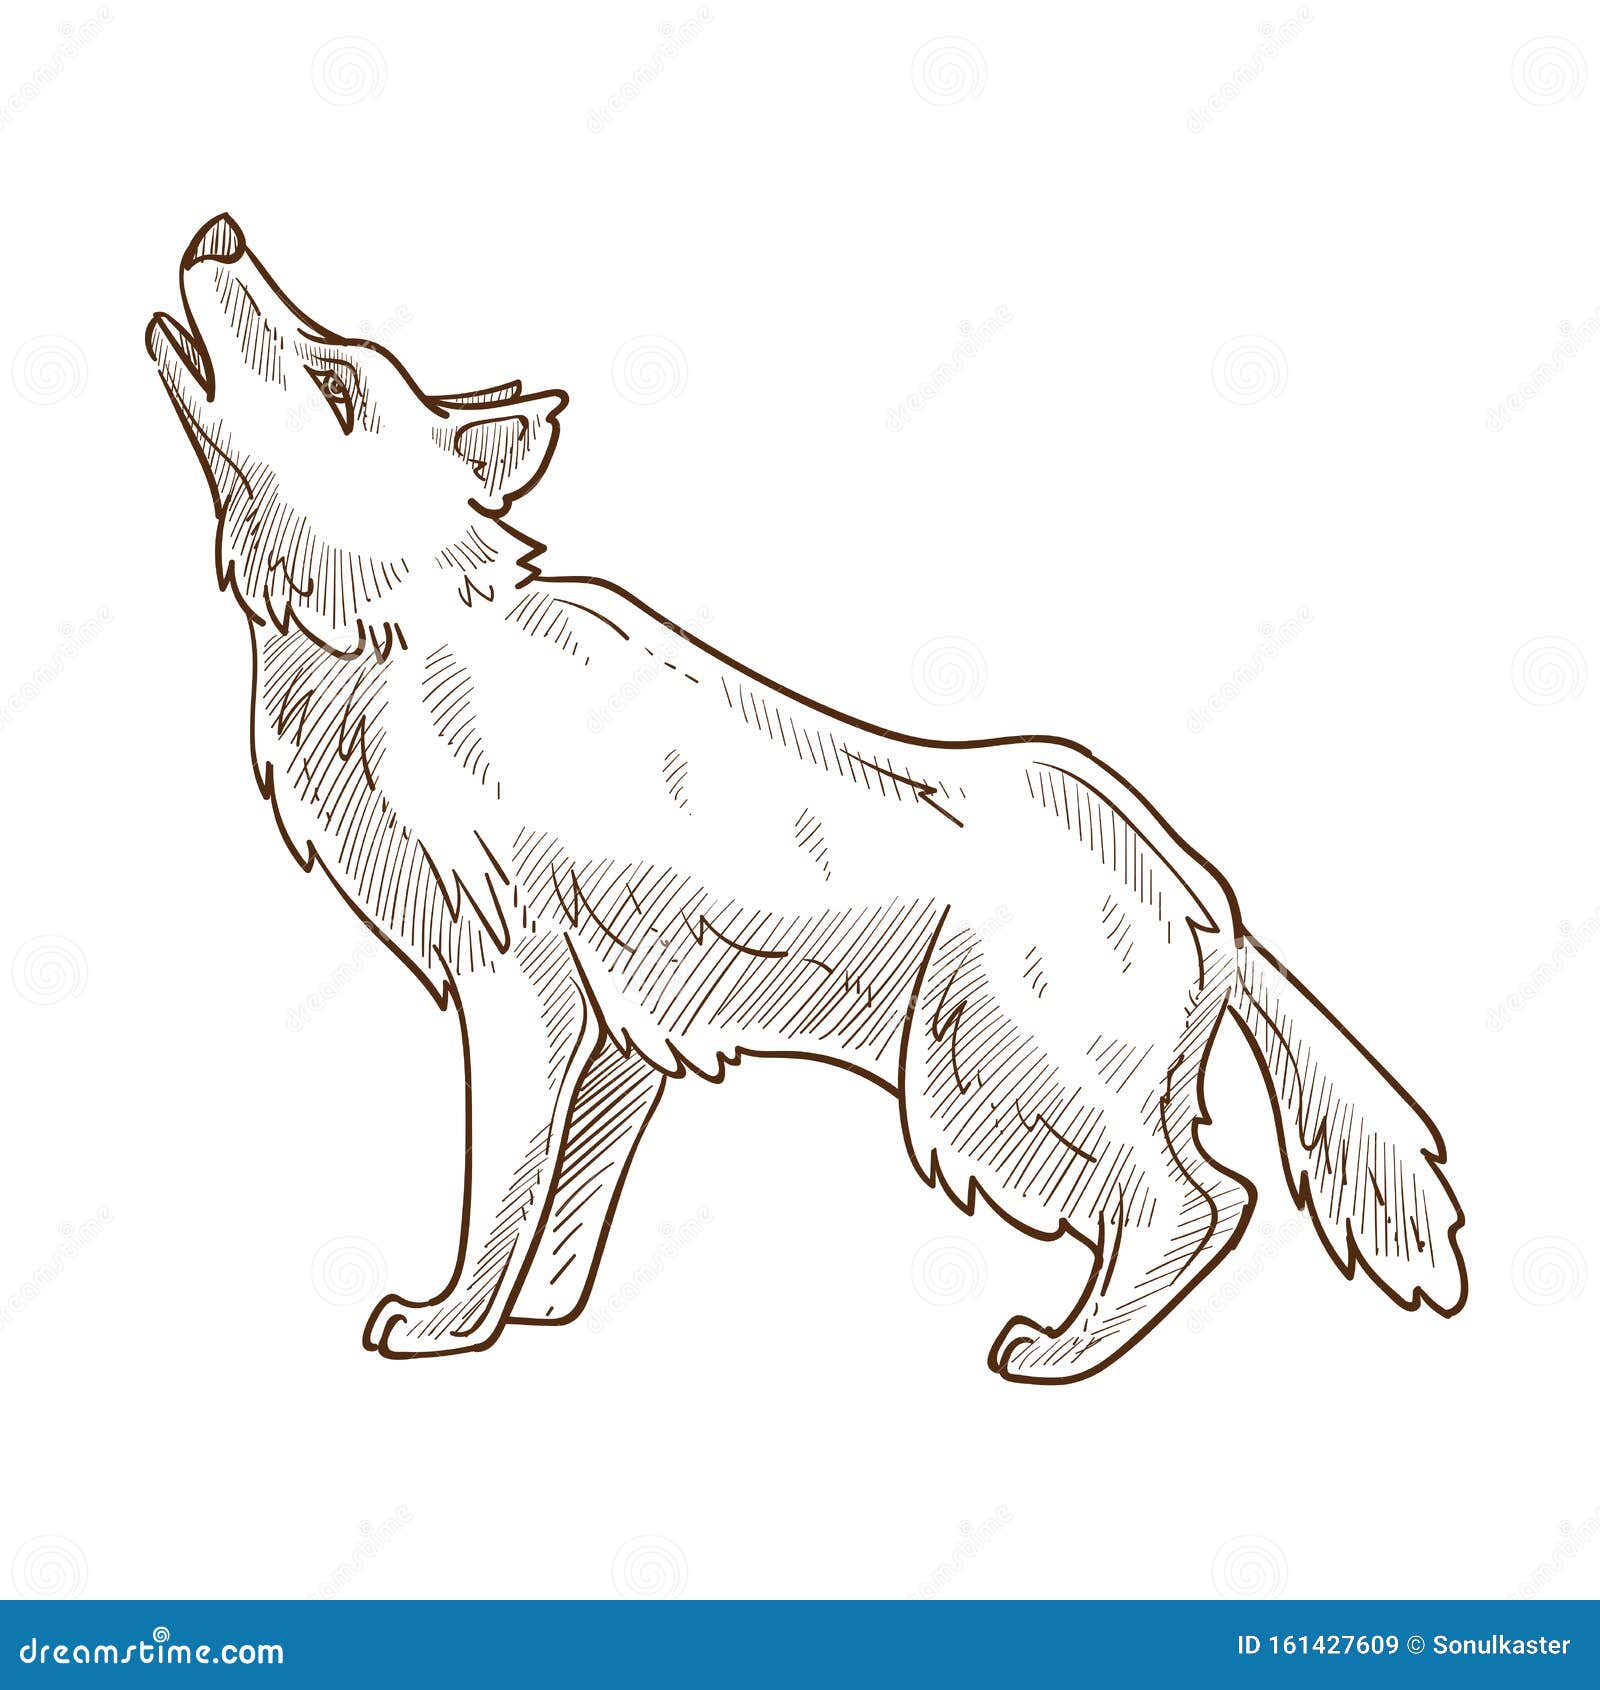 How to draw Howling Wolf Silhouette | Wild Animals - Sketchok easy drawing  guides